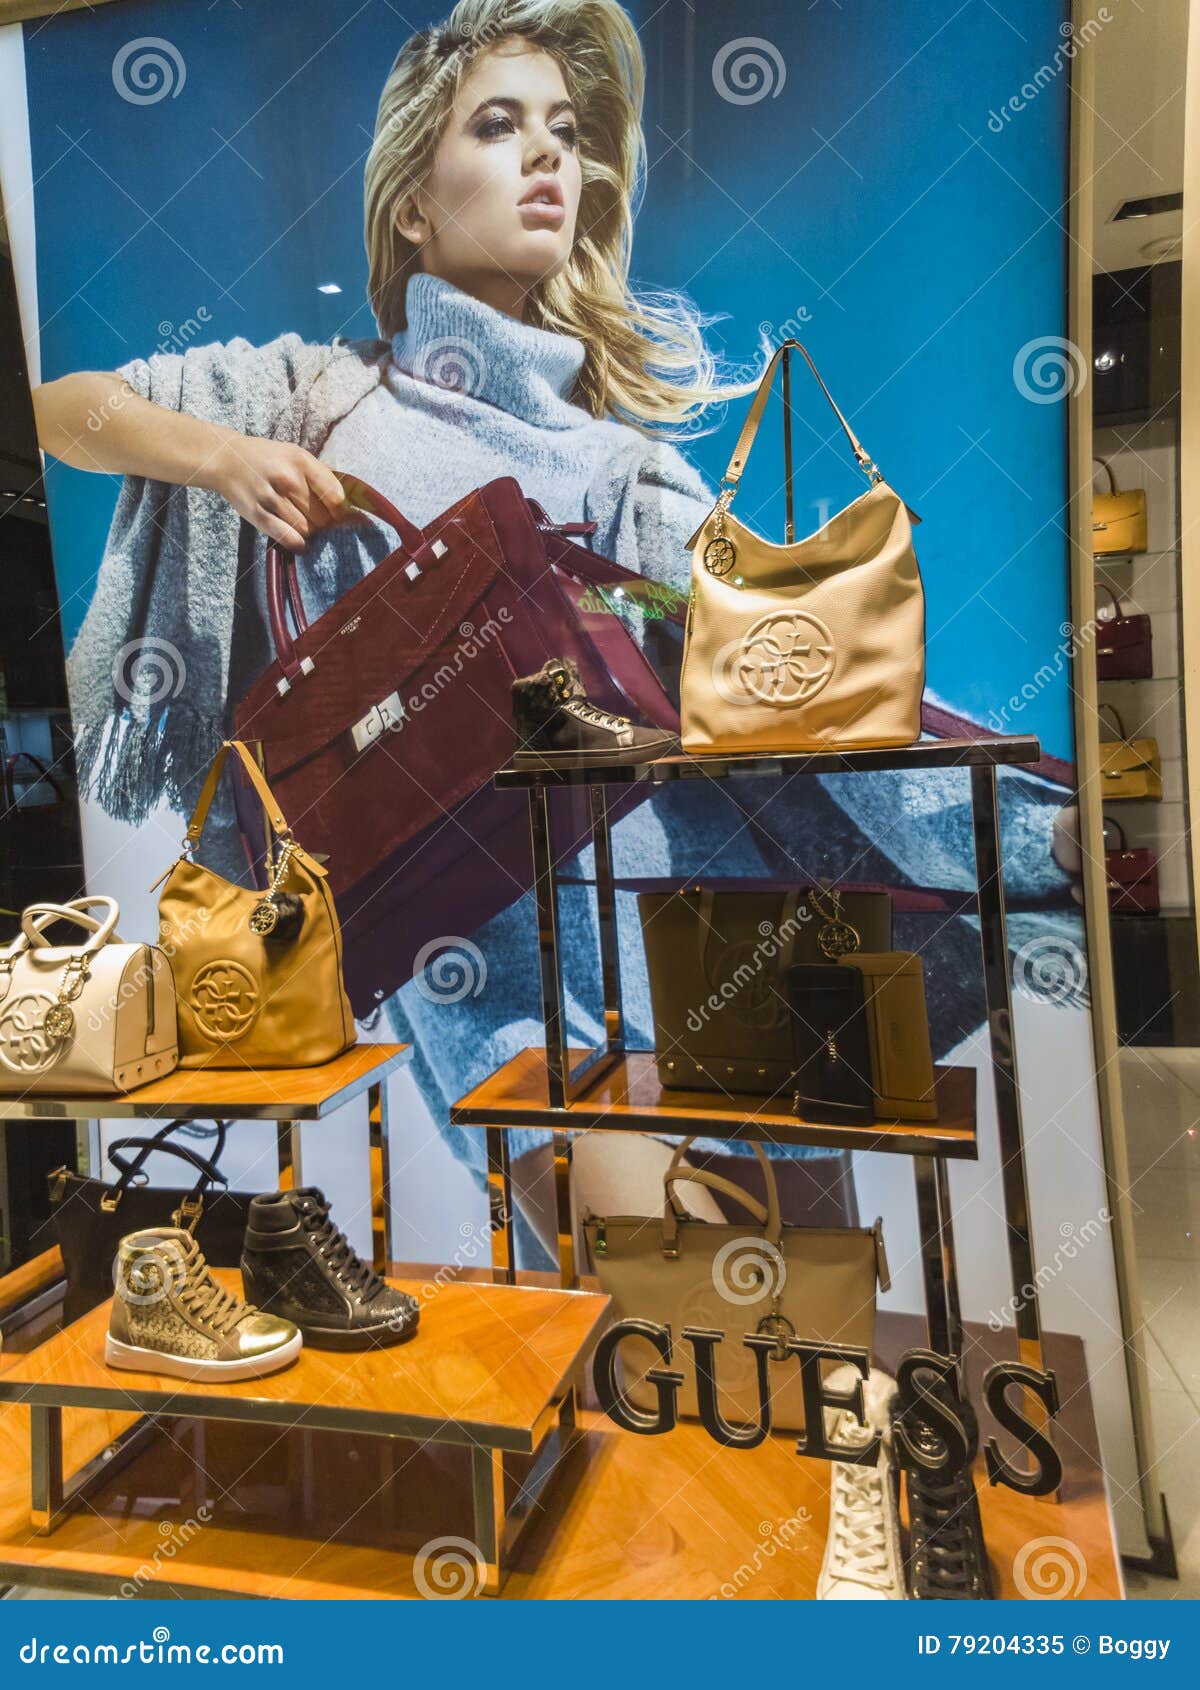 Guess store editorial image. Image of shopping, - 79204335